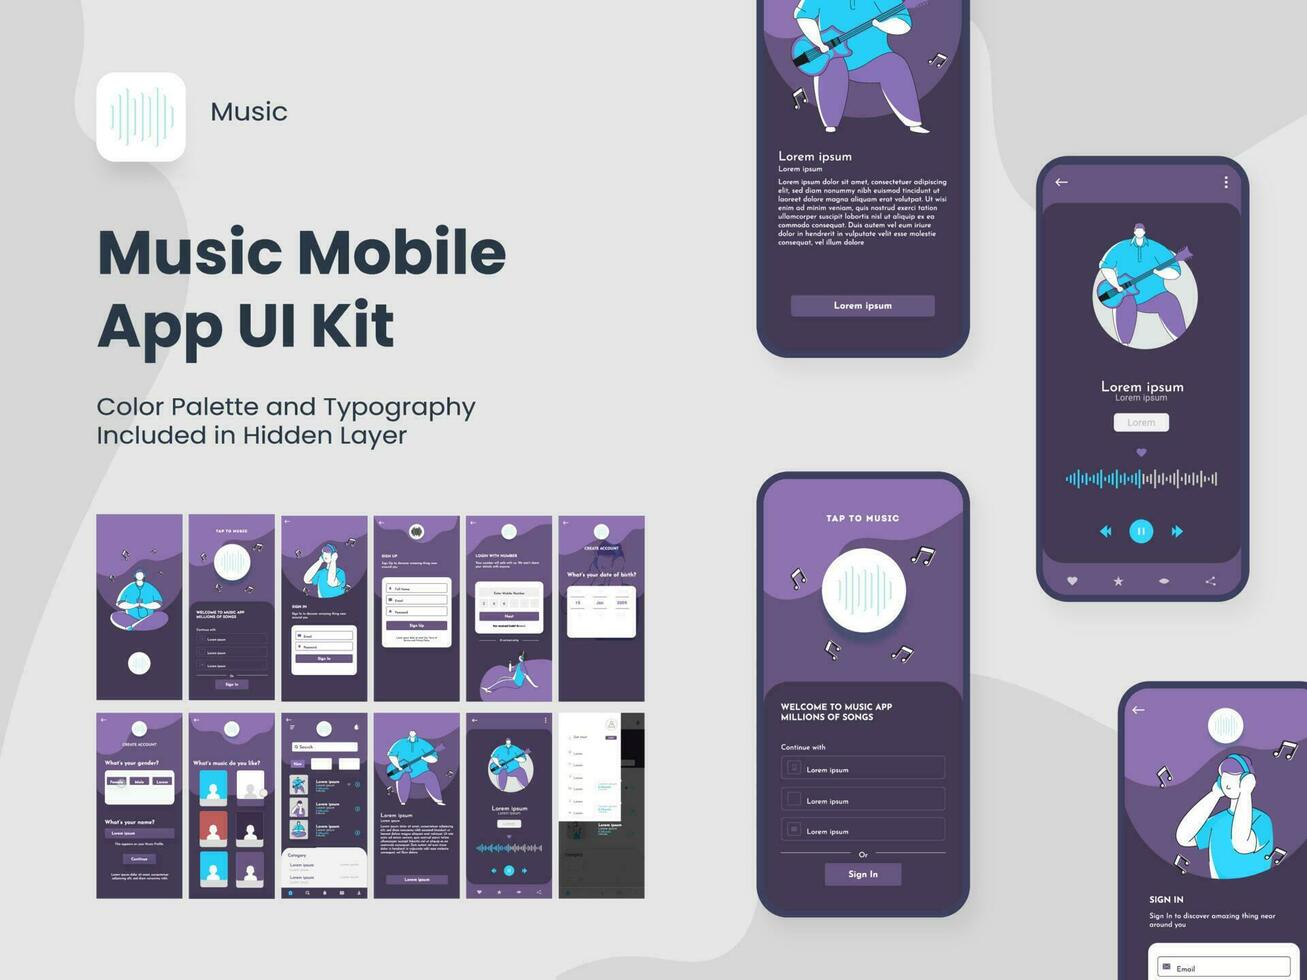 Wireframe UI, UX and GUI Layout with Different Login Screens including Account Sign In, Sign Up, Playlist for Music Mobile App. vector